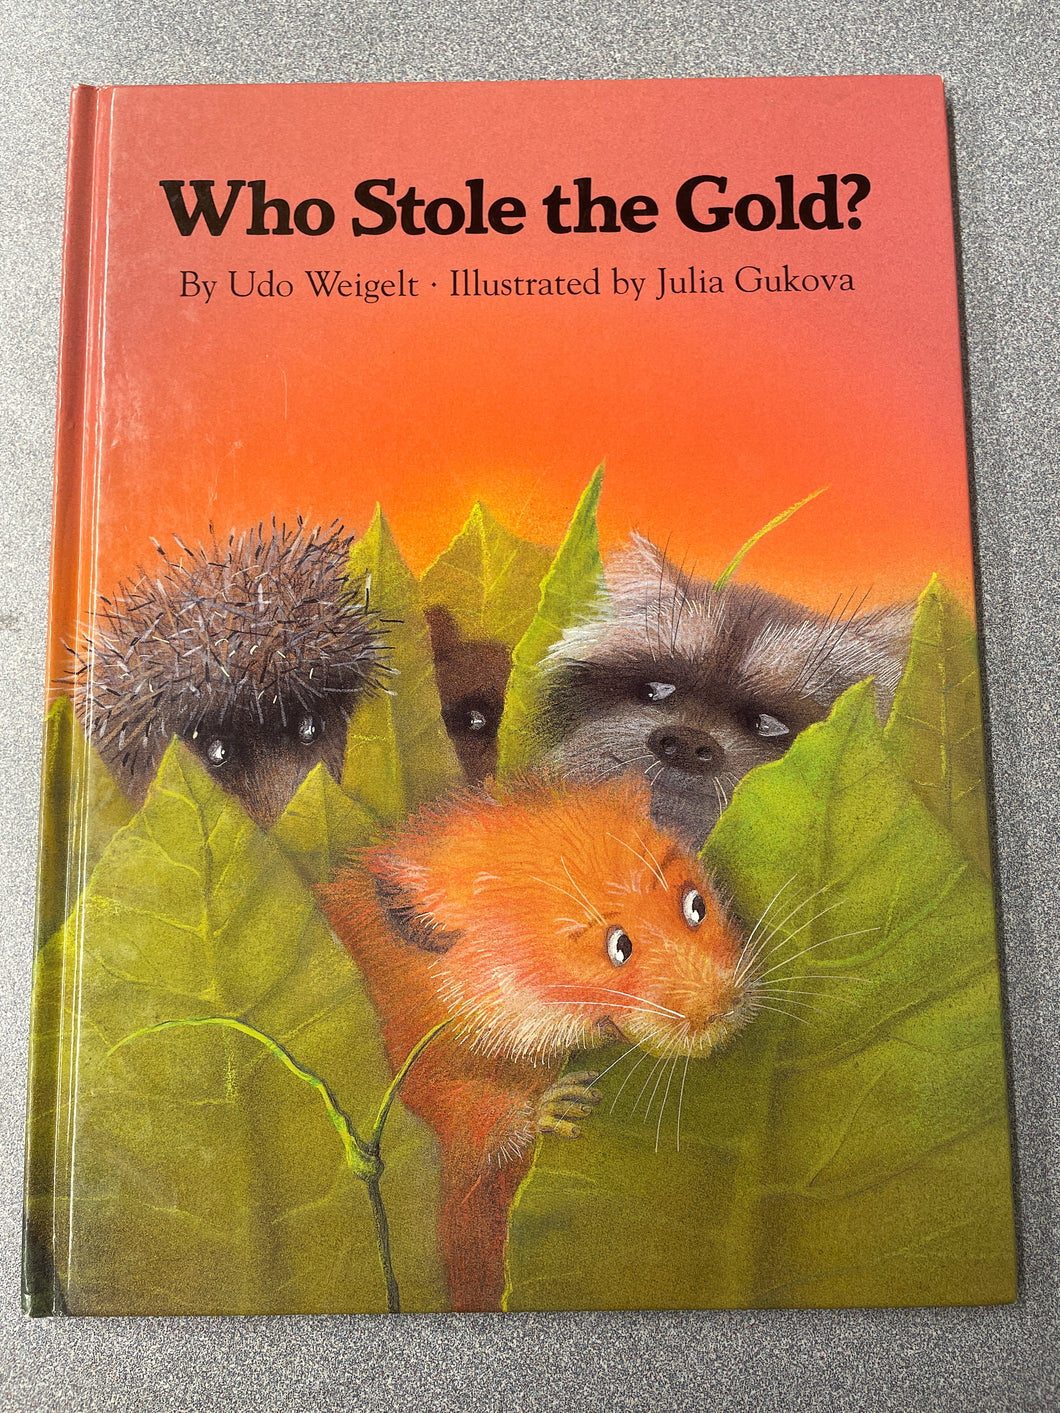 Weigelt, Udo, Who Stole the Gold?, [2000]  CP 2/24